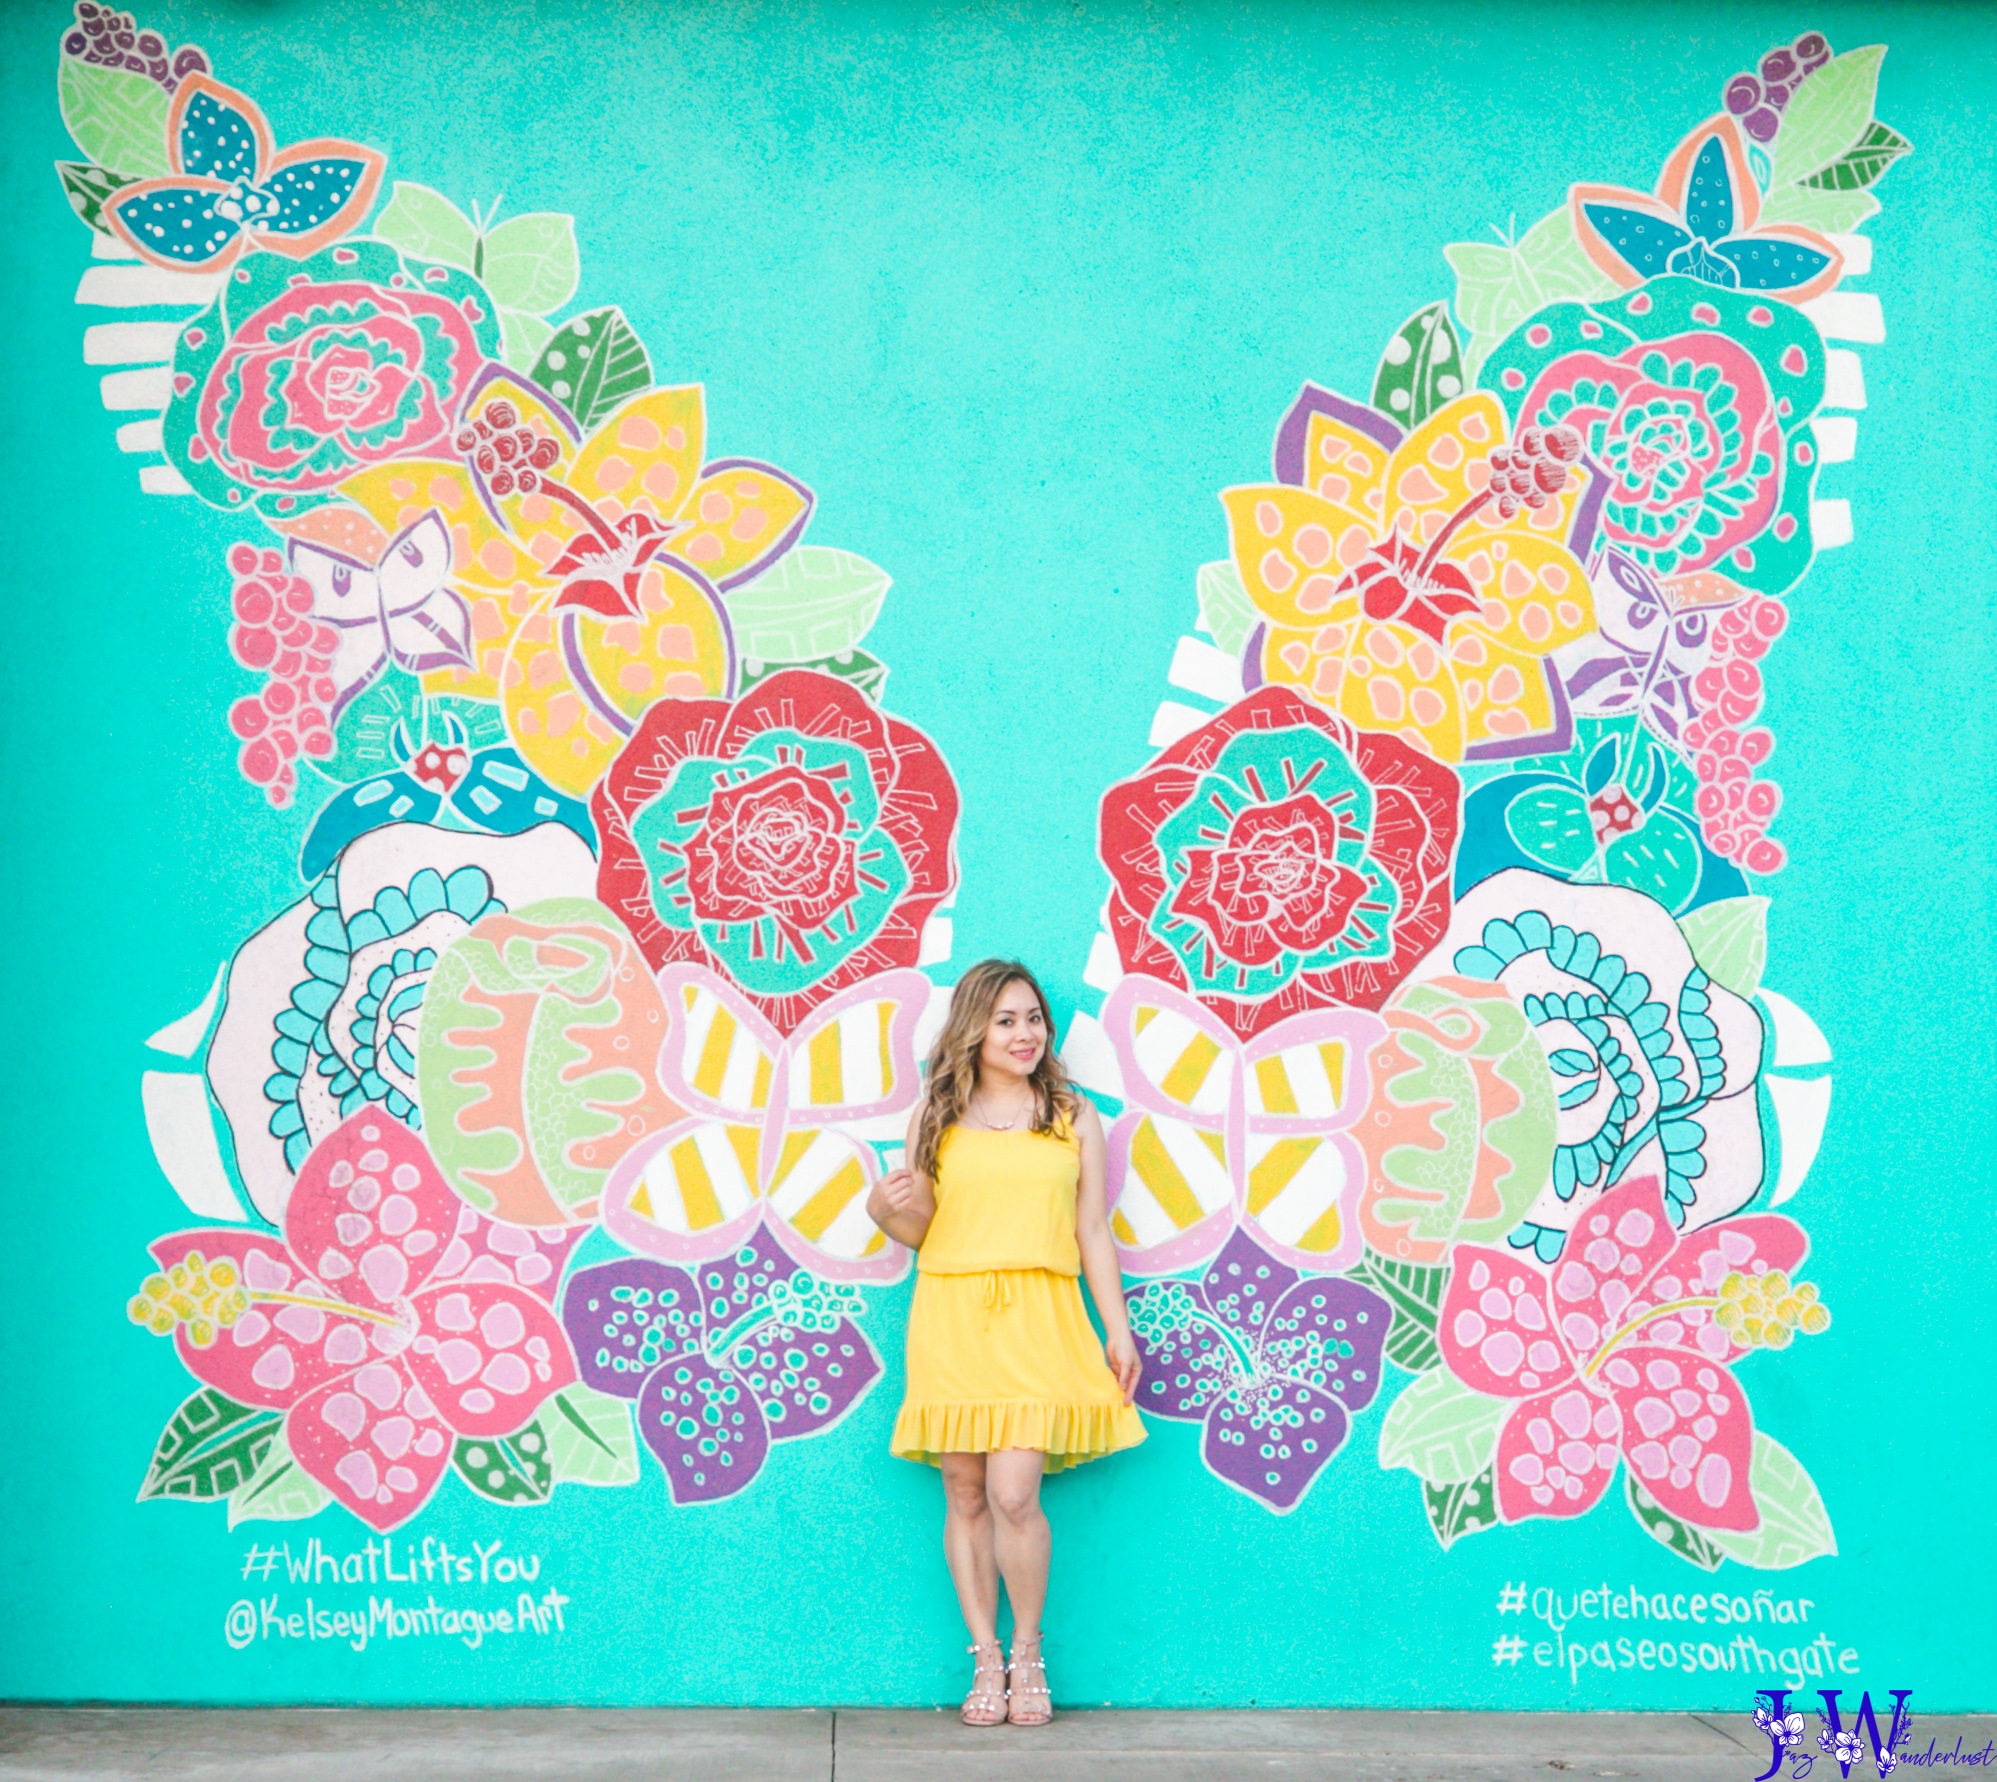 Wearing a yellow dress standing in front of Kelsey Montague butterfly wings at El Paseo South Gate in Los Angeles